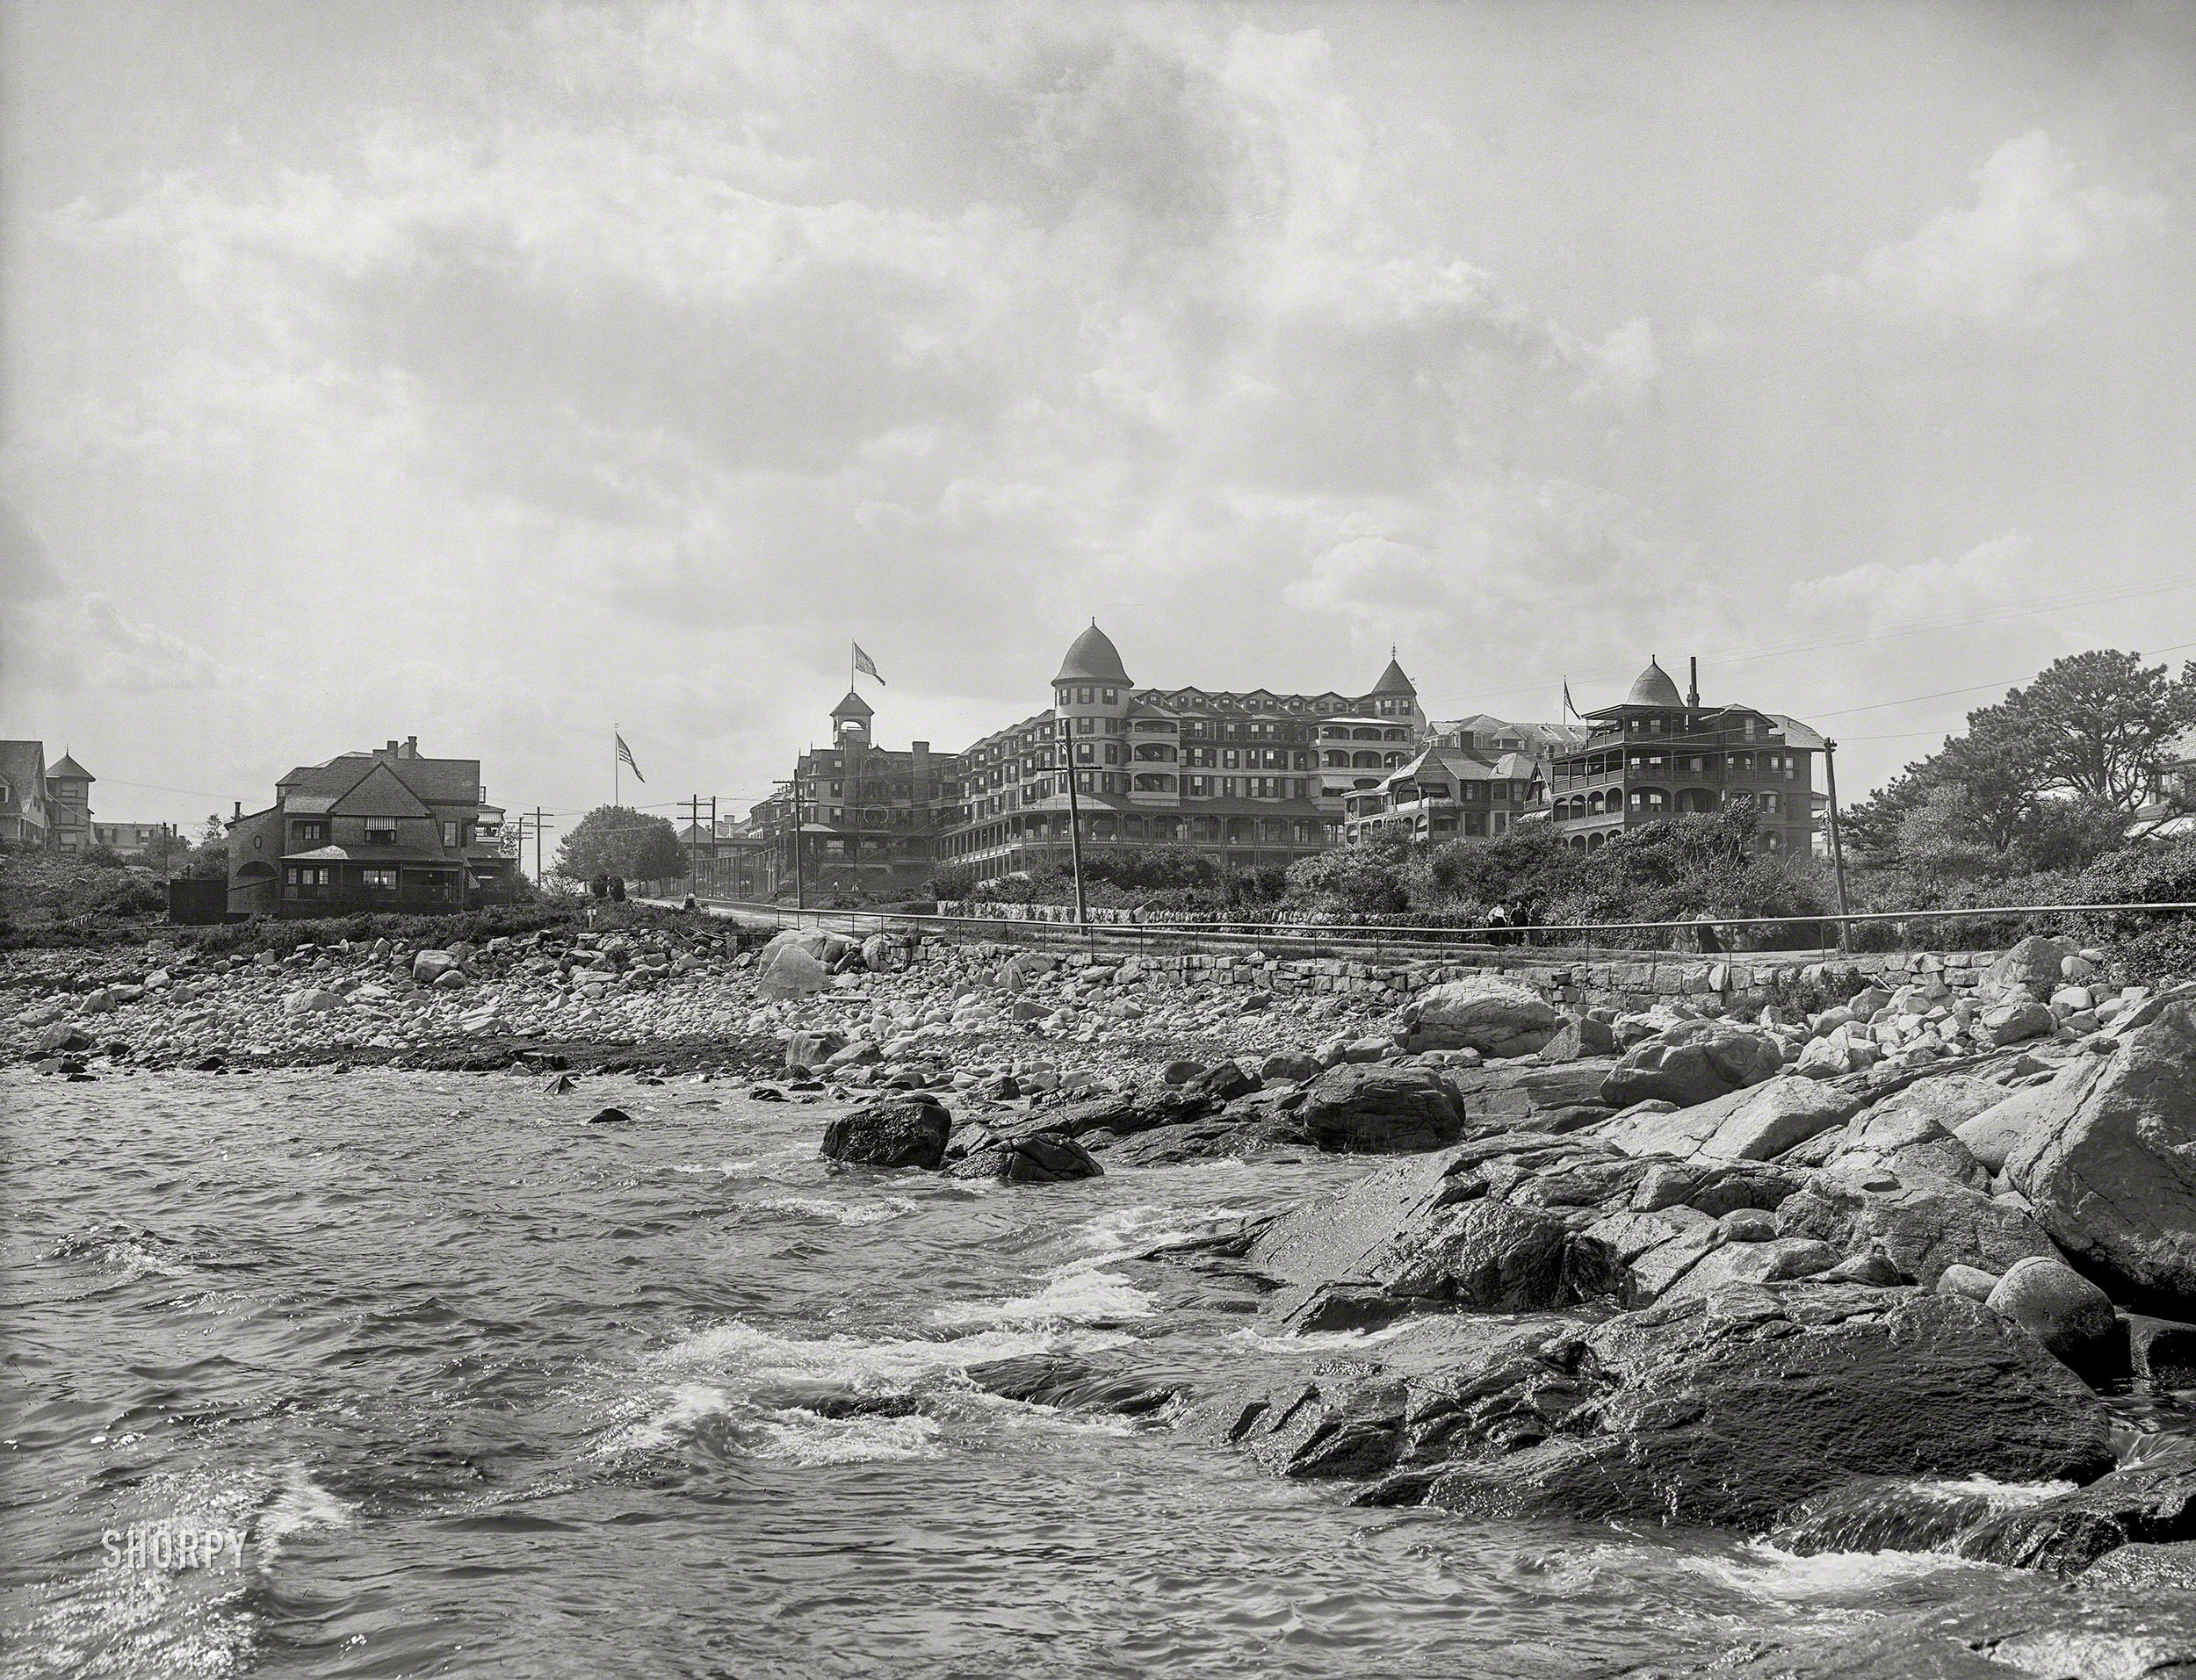 Magnolia, Massachusetts, circa 1906. "The Oceanside from Cobblestone Beach." 8x10 inch dry plate glass negative, Detroit Publishing Company. View full size.